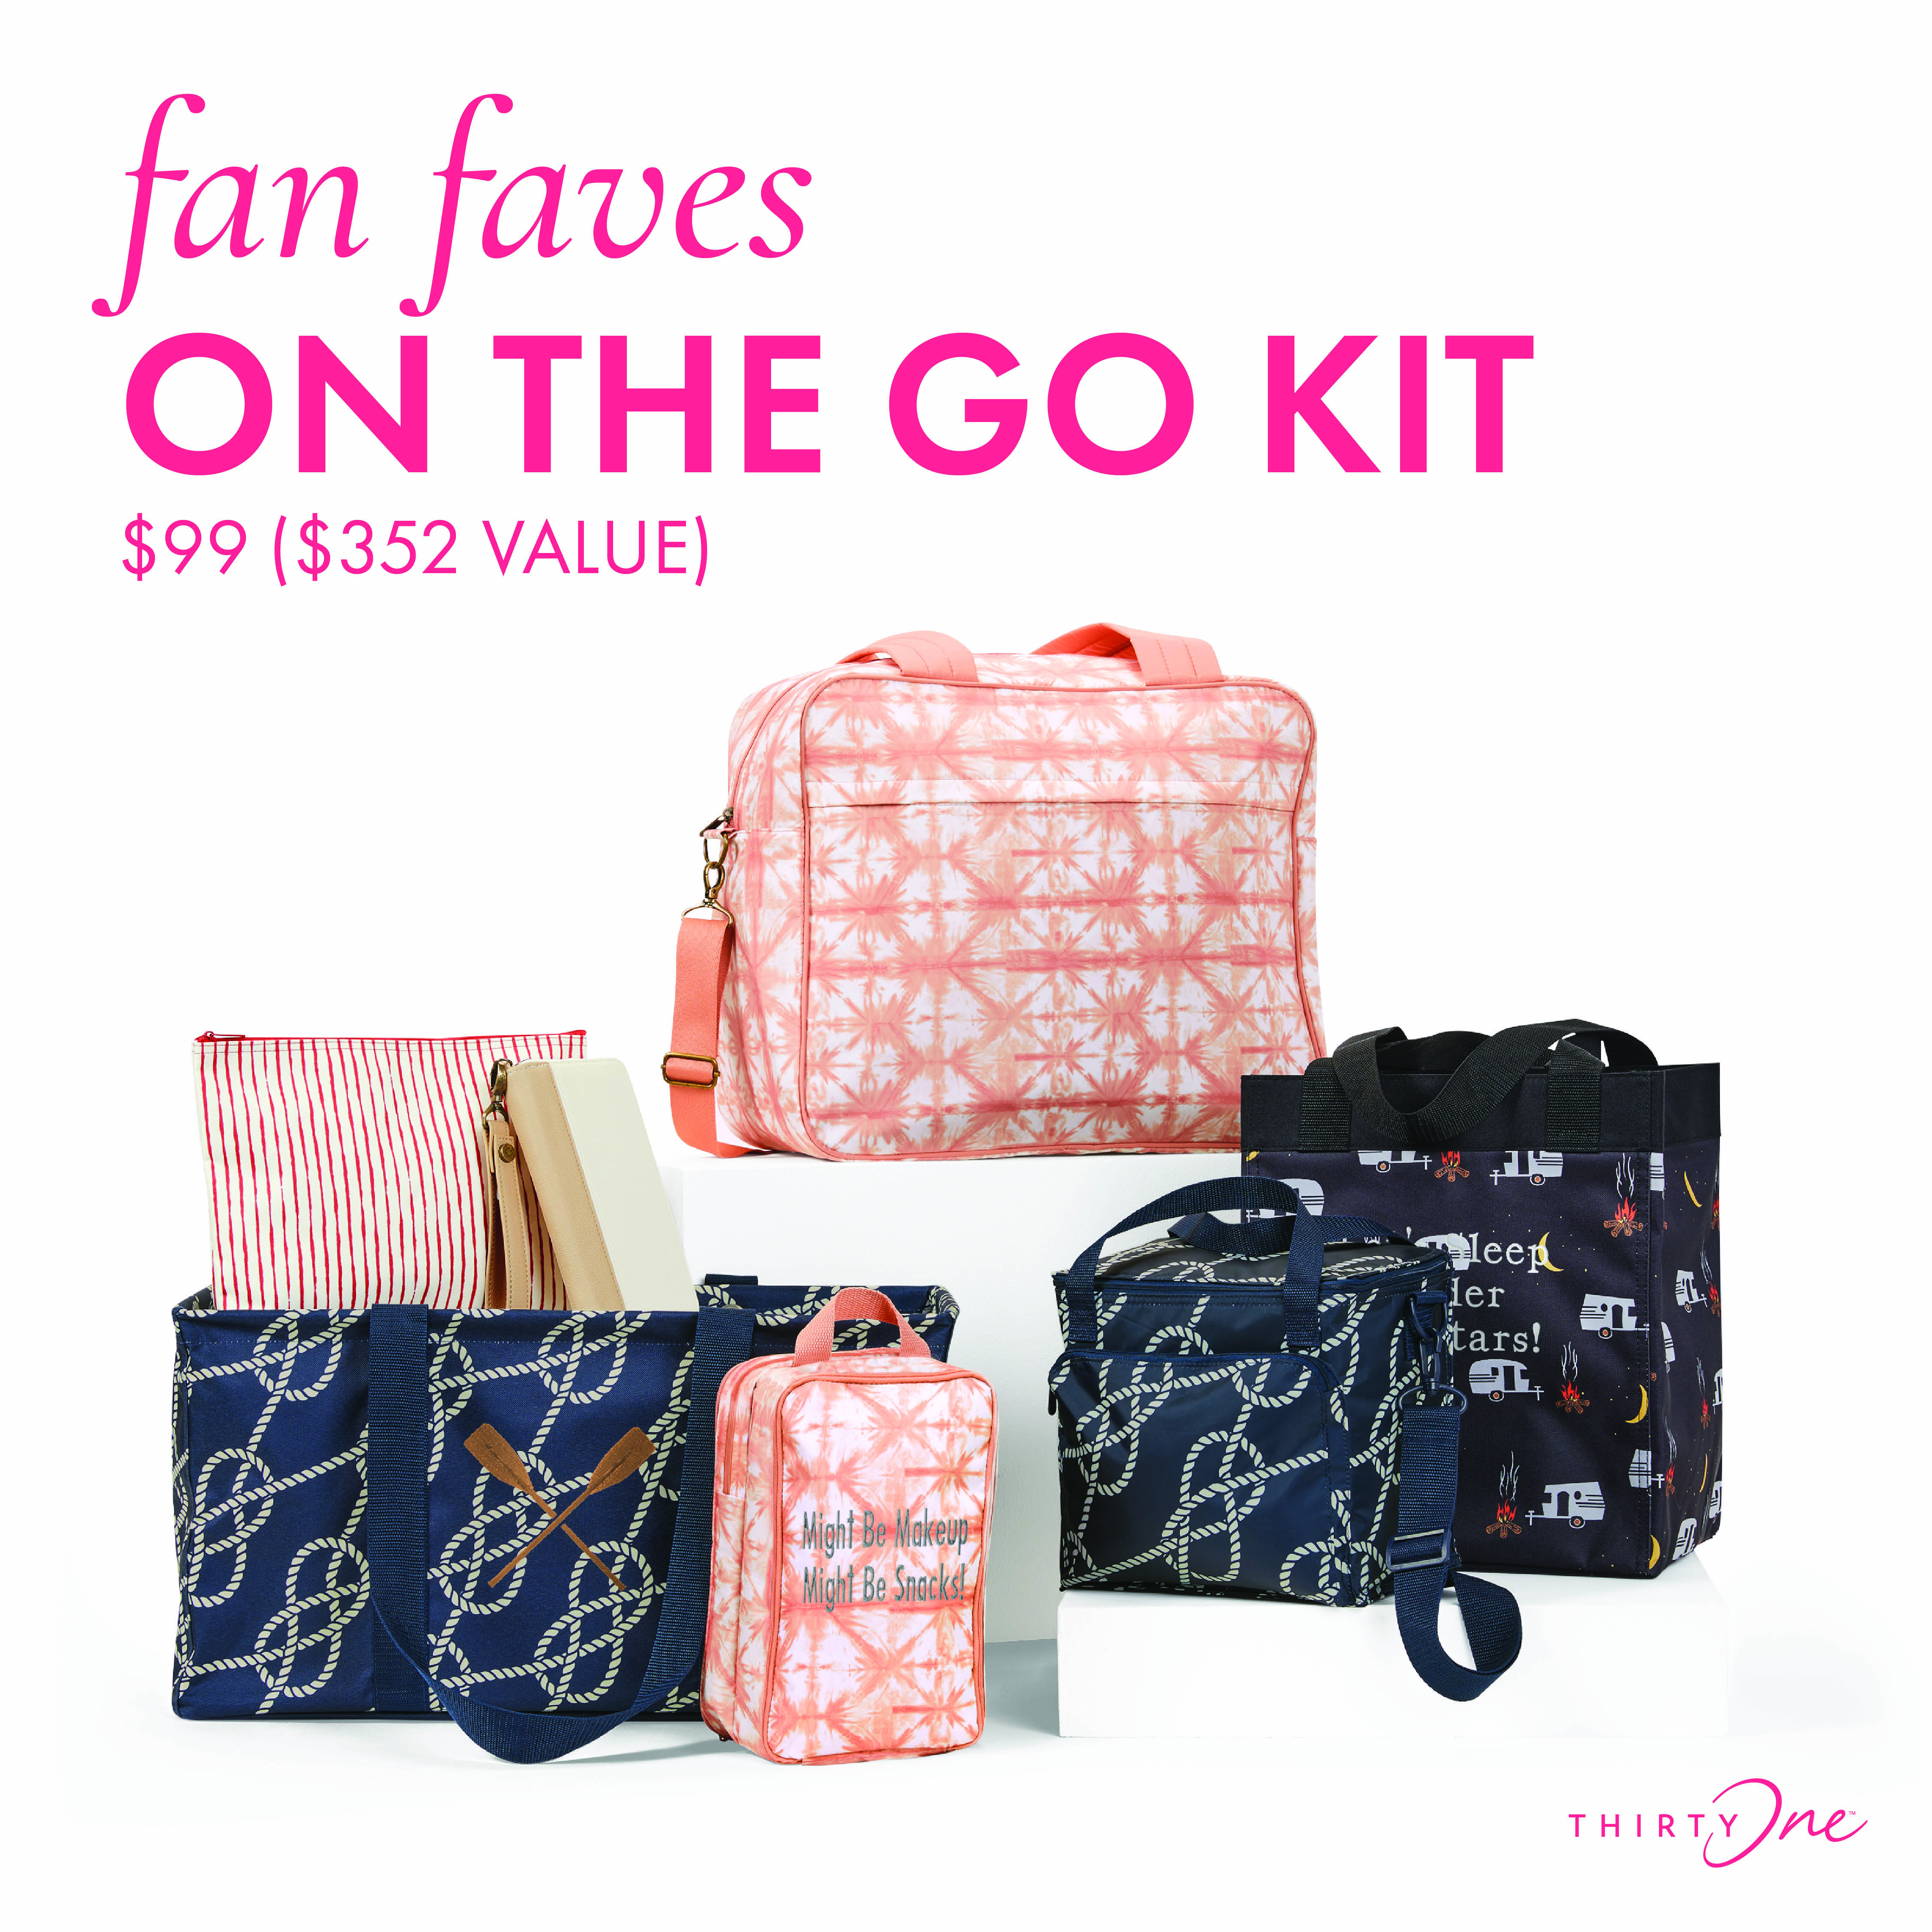 Fan Faves On The Go Kit